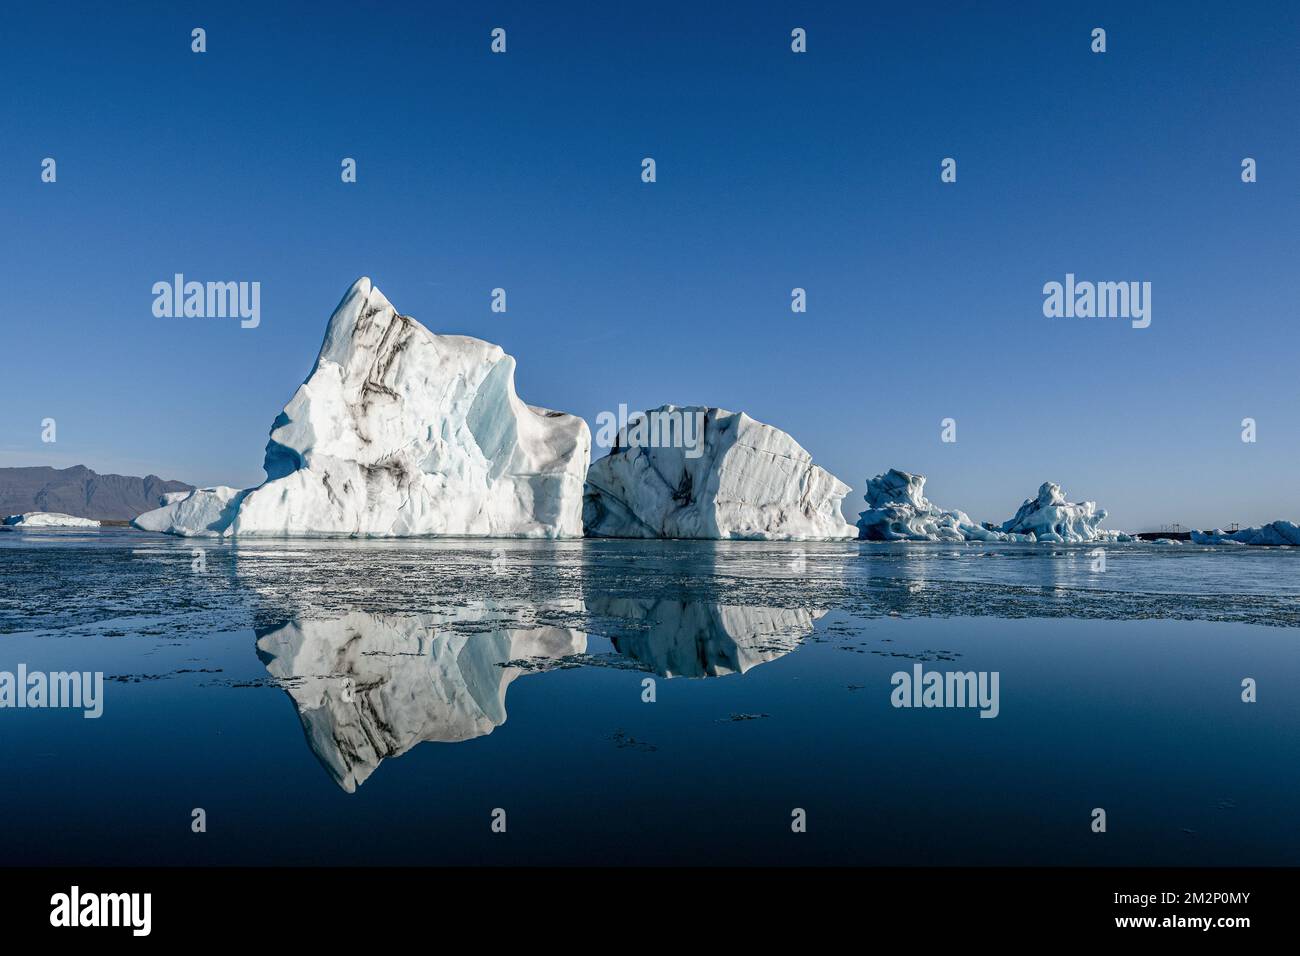 October 19, 2022, JÃ¶kulsÃrlÃ³n, JÃ¶kulsÃrlÃ³n, Iceland: General view of Icebergs visible floating on the waters of Lake JÃ¶kulsÃrlÃ³n. JÃ¶kulsÃrlÃ³n is a lake located in southern Iceland, with an area of 20 km2 and a depth of over 200 meters. Until less than 100 years ago, the BreiÃ°amerkurjÃ¶kull glacier (part of the VatnajÃ¶kull glacier) extended even beyond the ring road. Due to rising temperatures, the glacier has retreated, creating this impressive glacial lagoon. (Credit Image: © Jorge Castellanos/SOPA Images via ZUMA Press Wire) Stock Photo